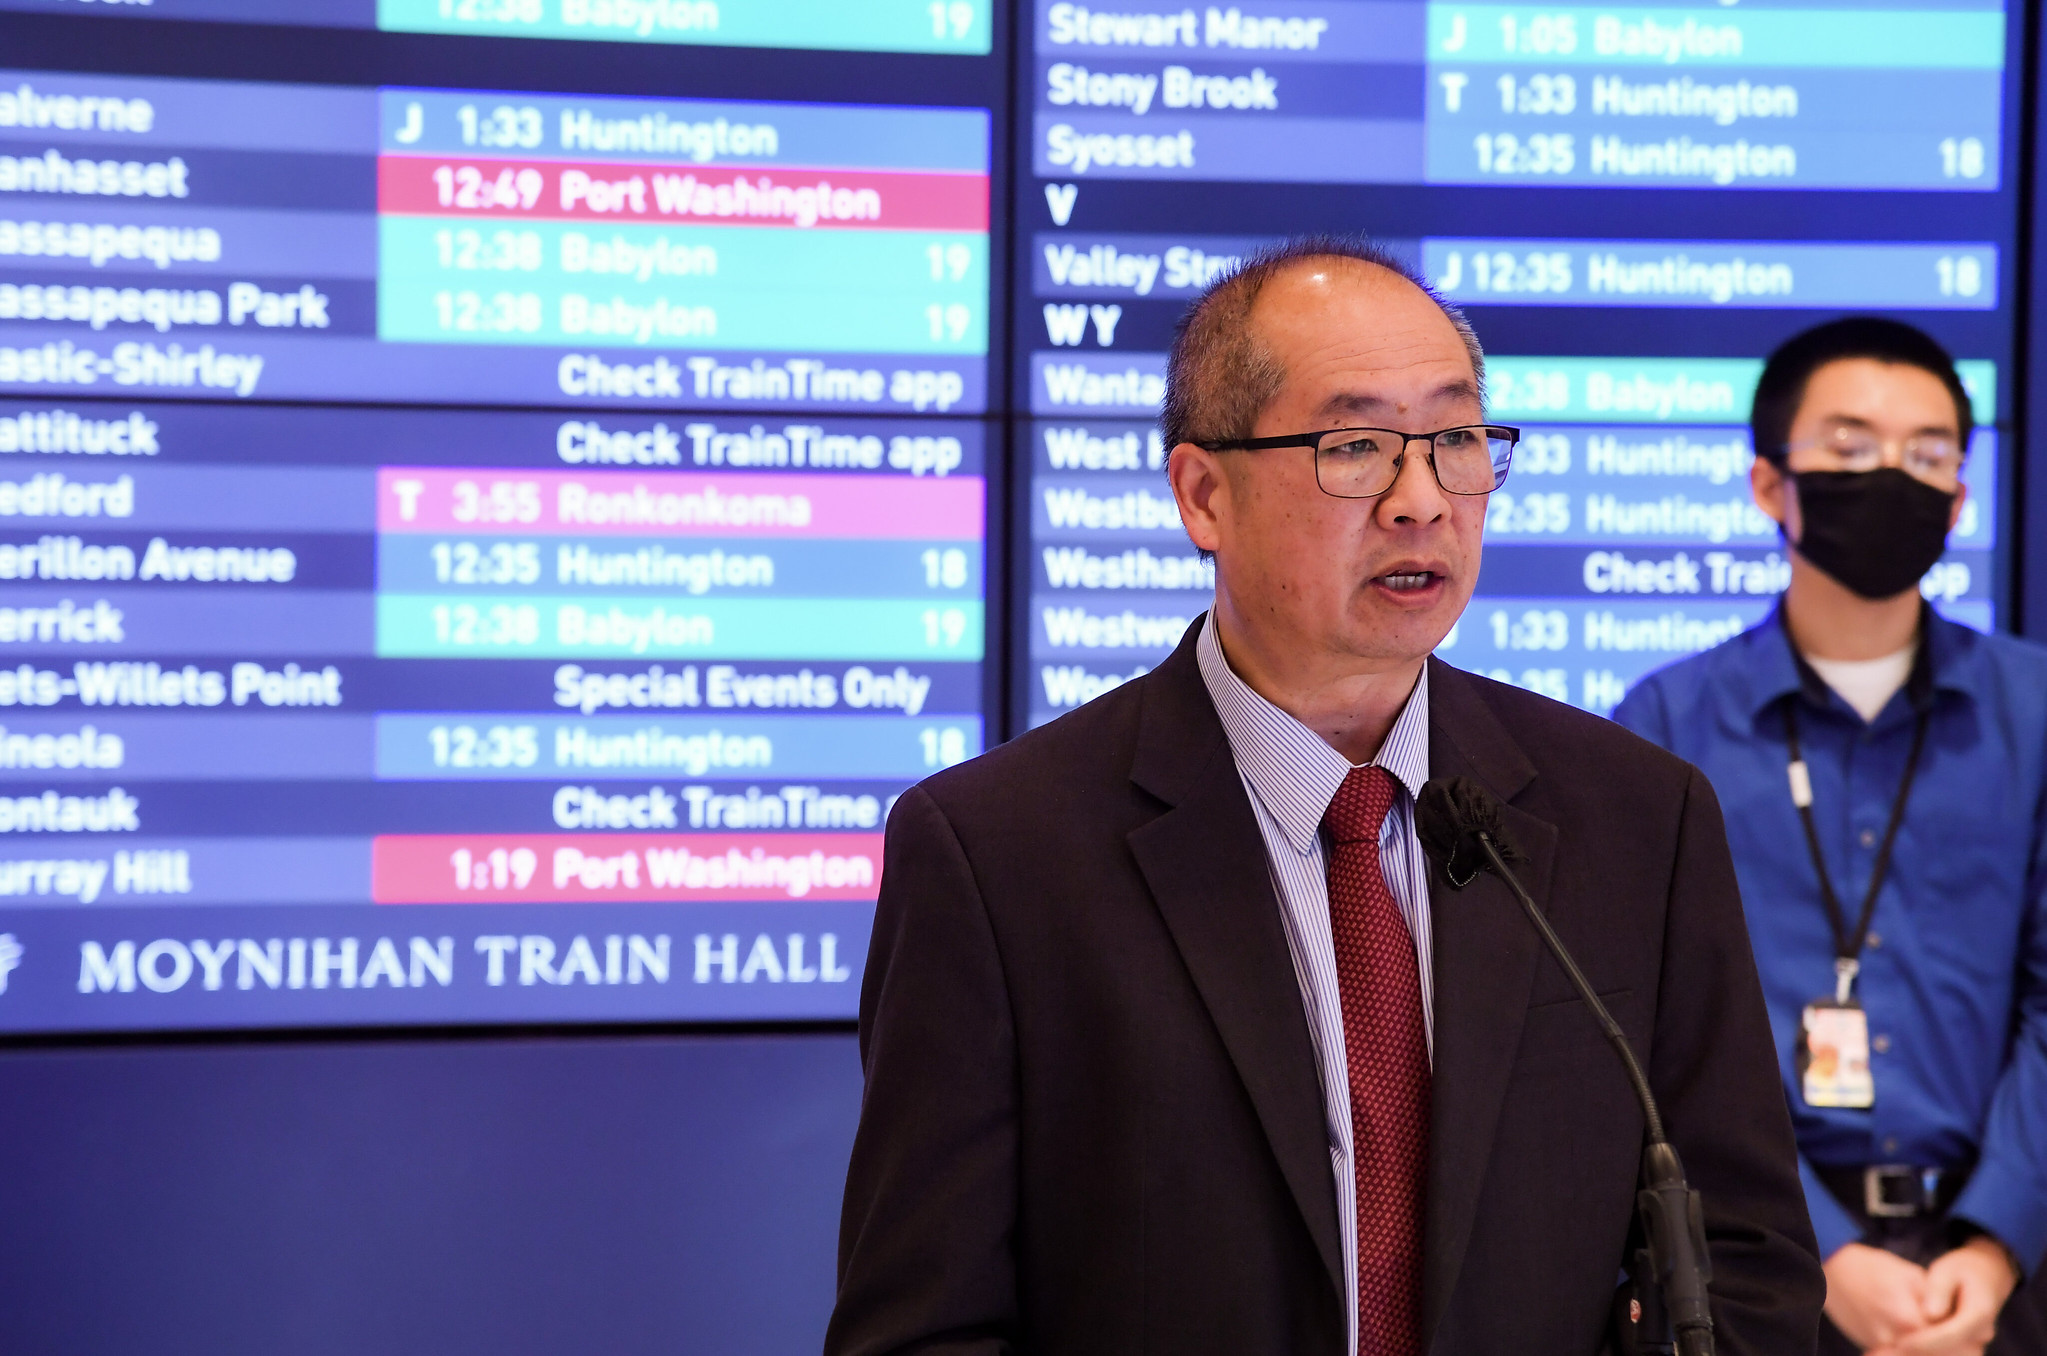 LIRR President Phil Eng announces update to LIRR TrainTime app at Moynihan Train Hall